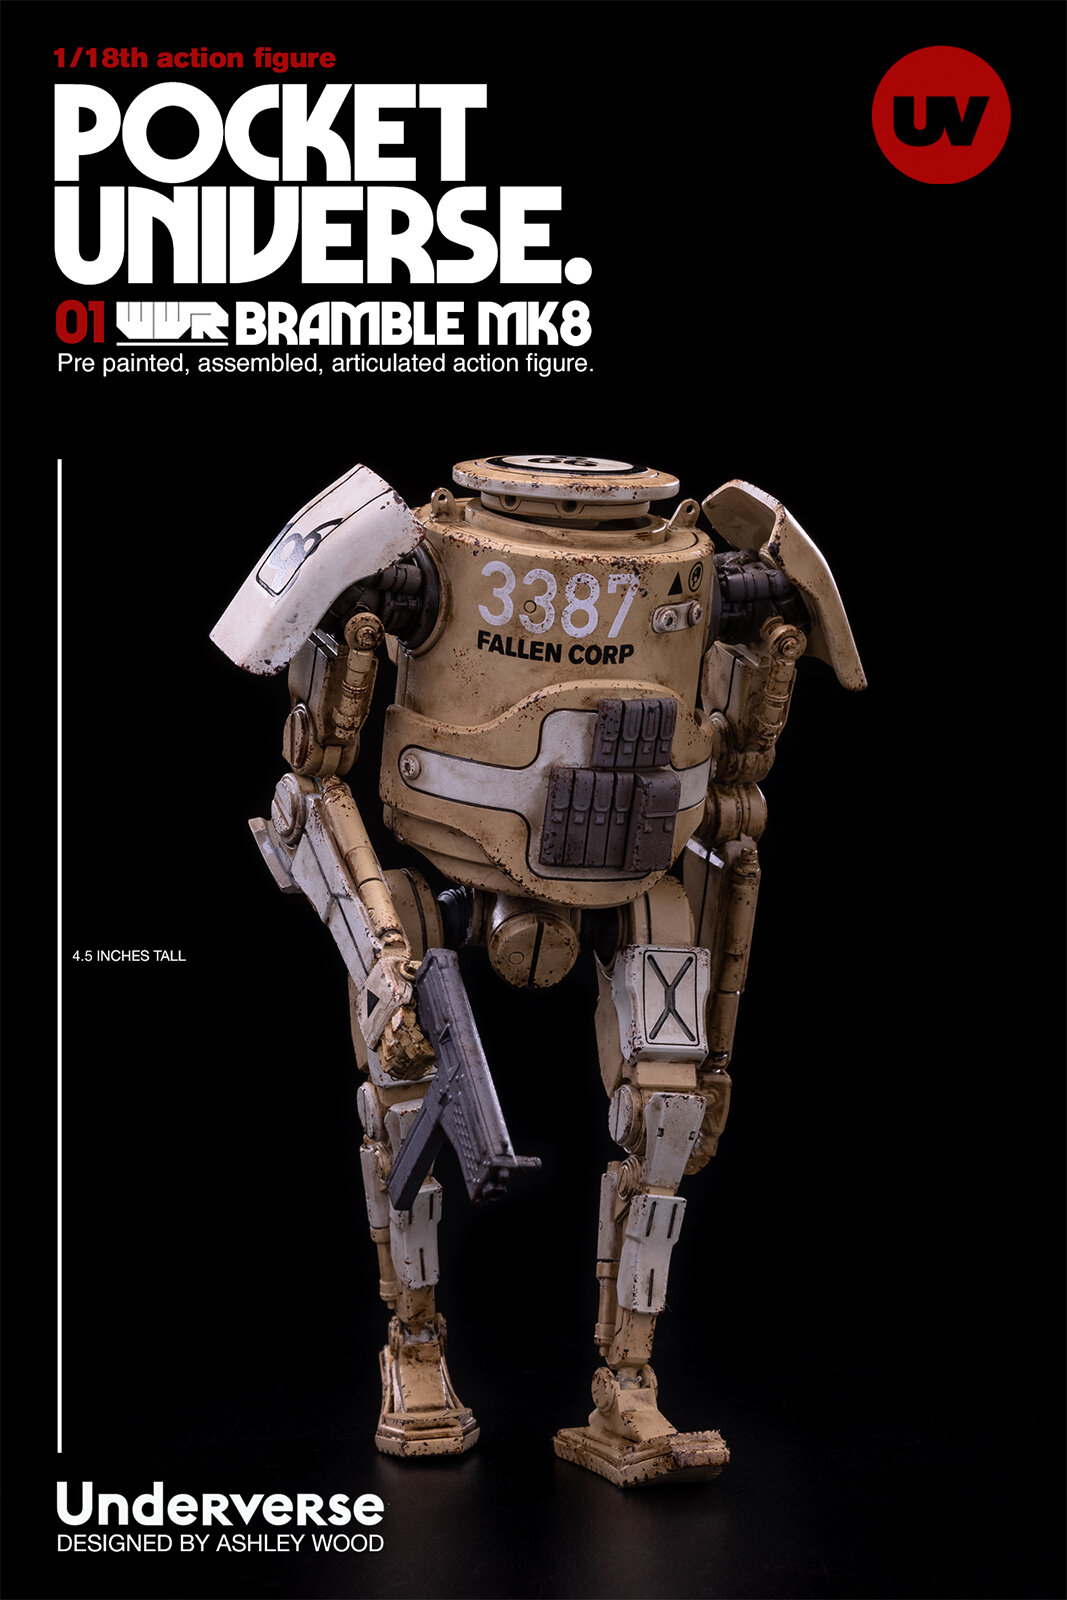 UV | Pocket Universe General Toy Discussion - Page 2 Dm1